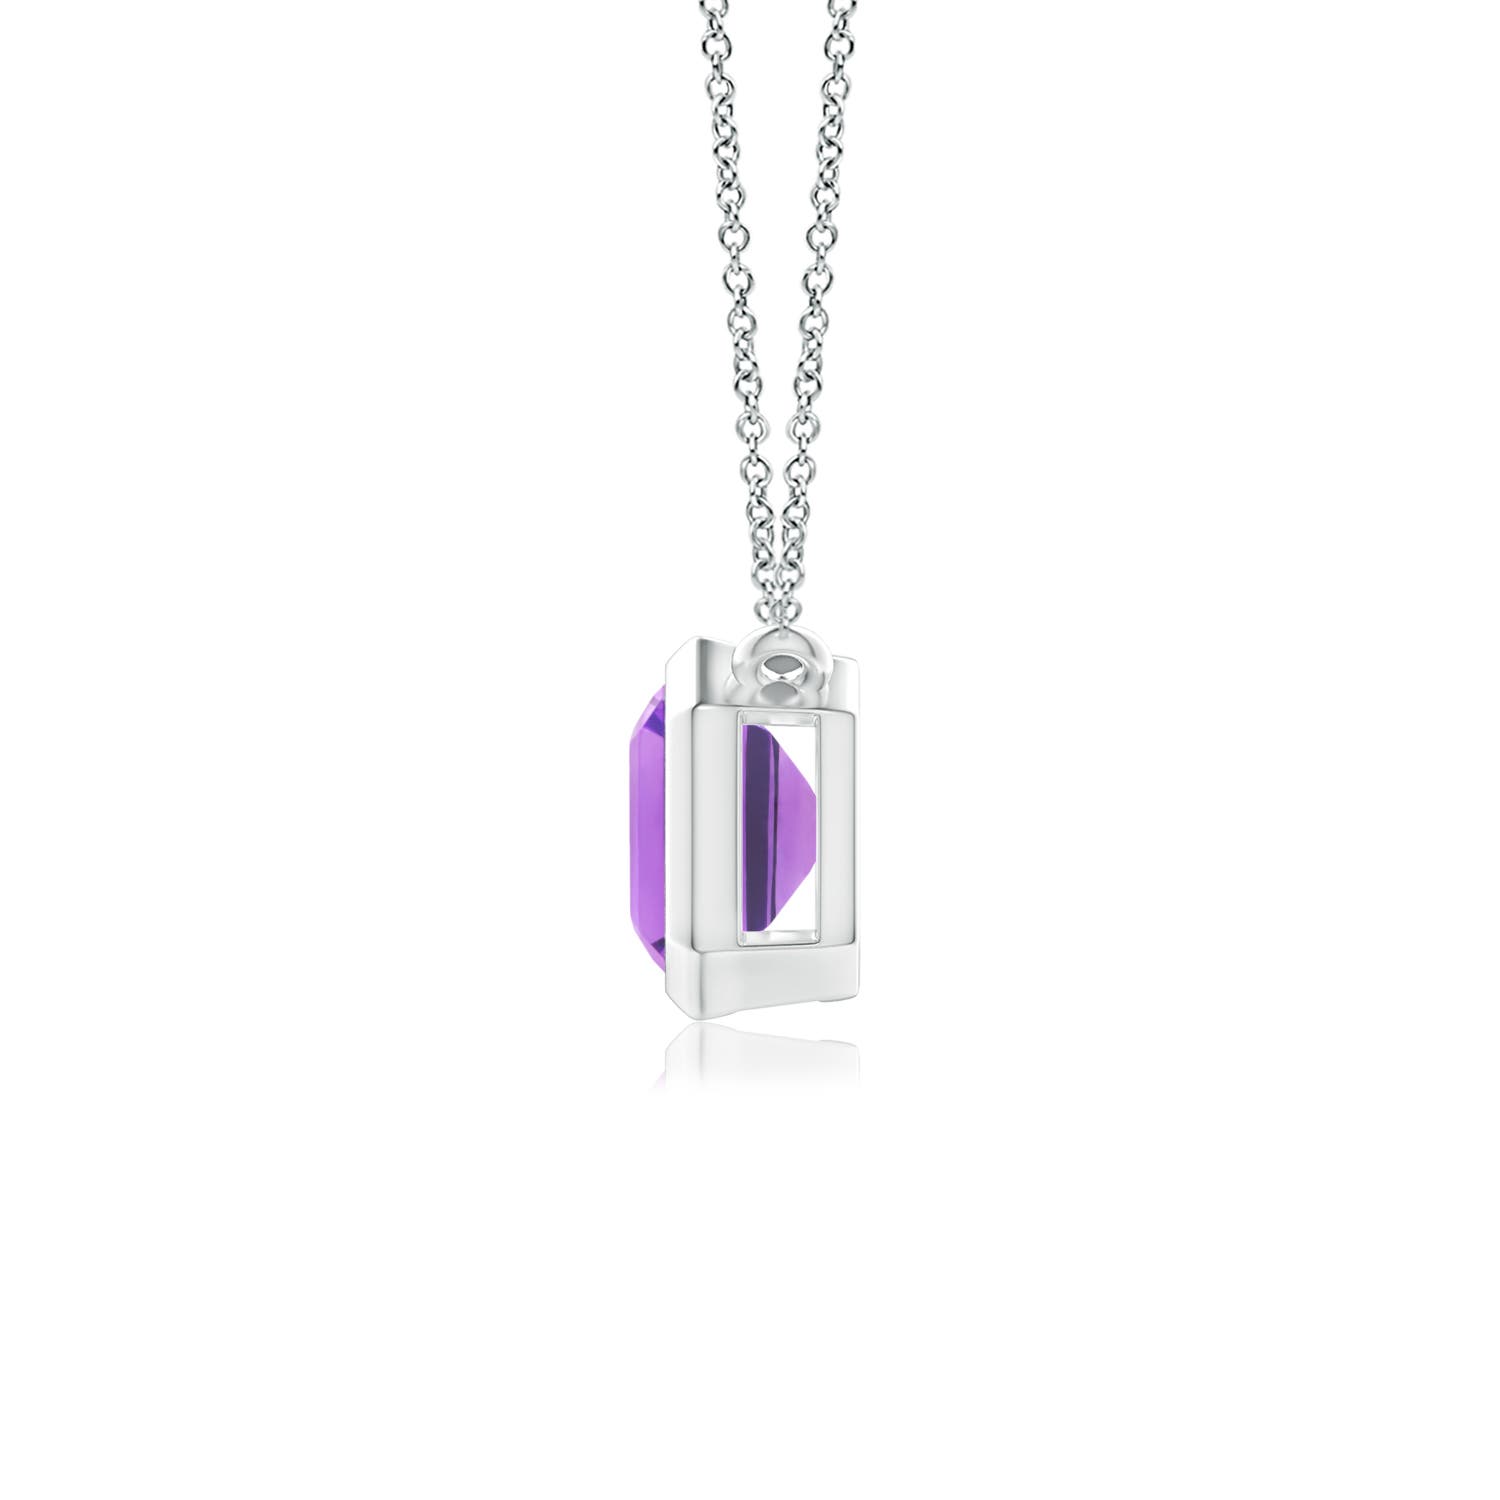 AA - Amethyst / 1.5 CT / 14 KT White Gold